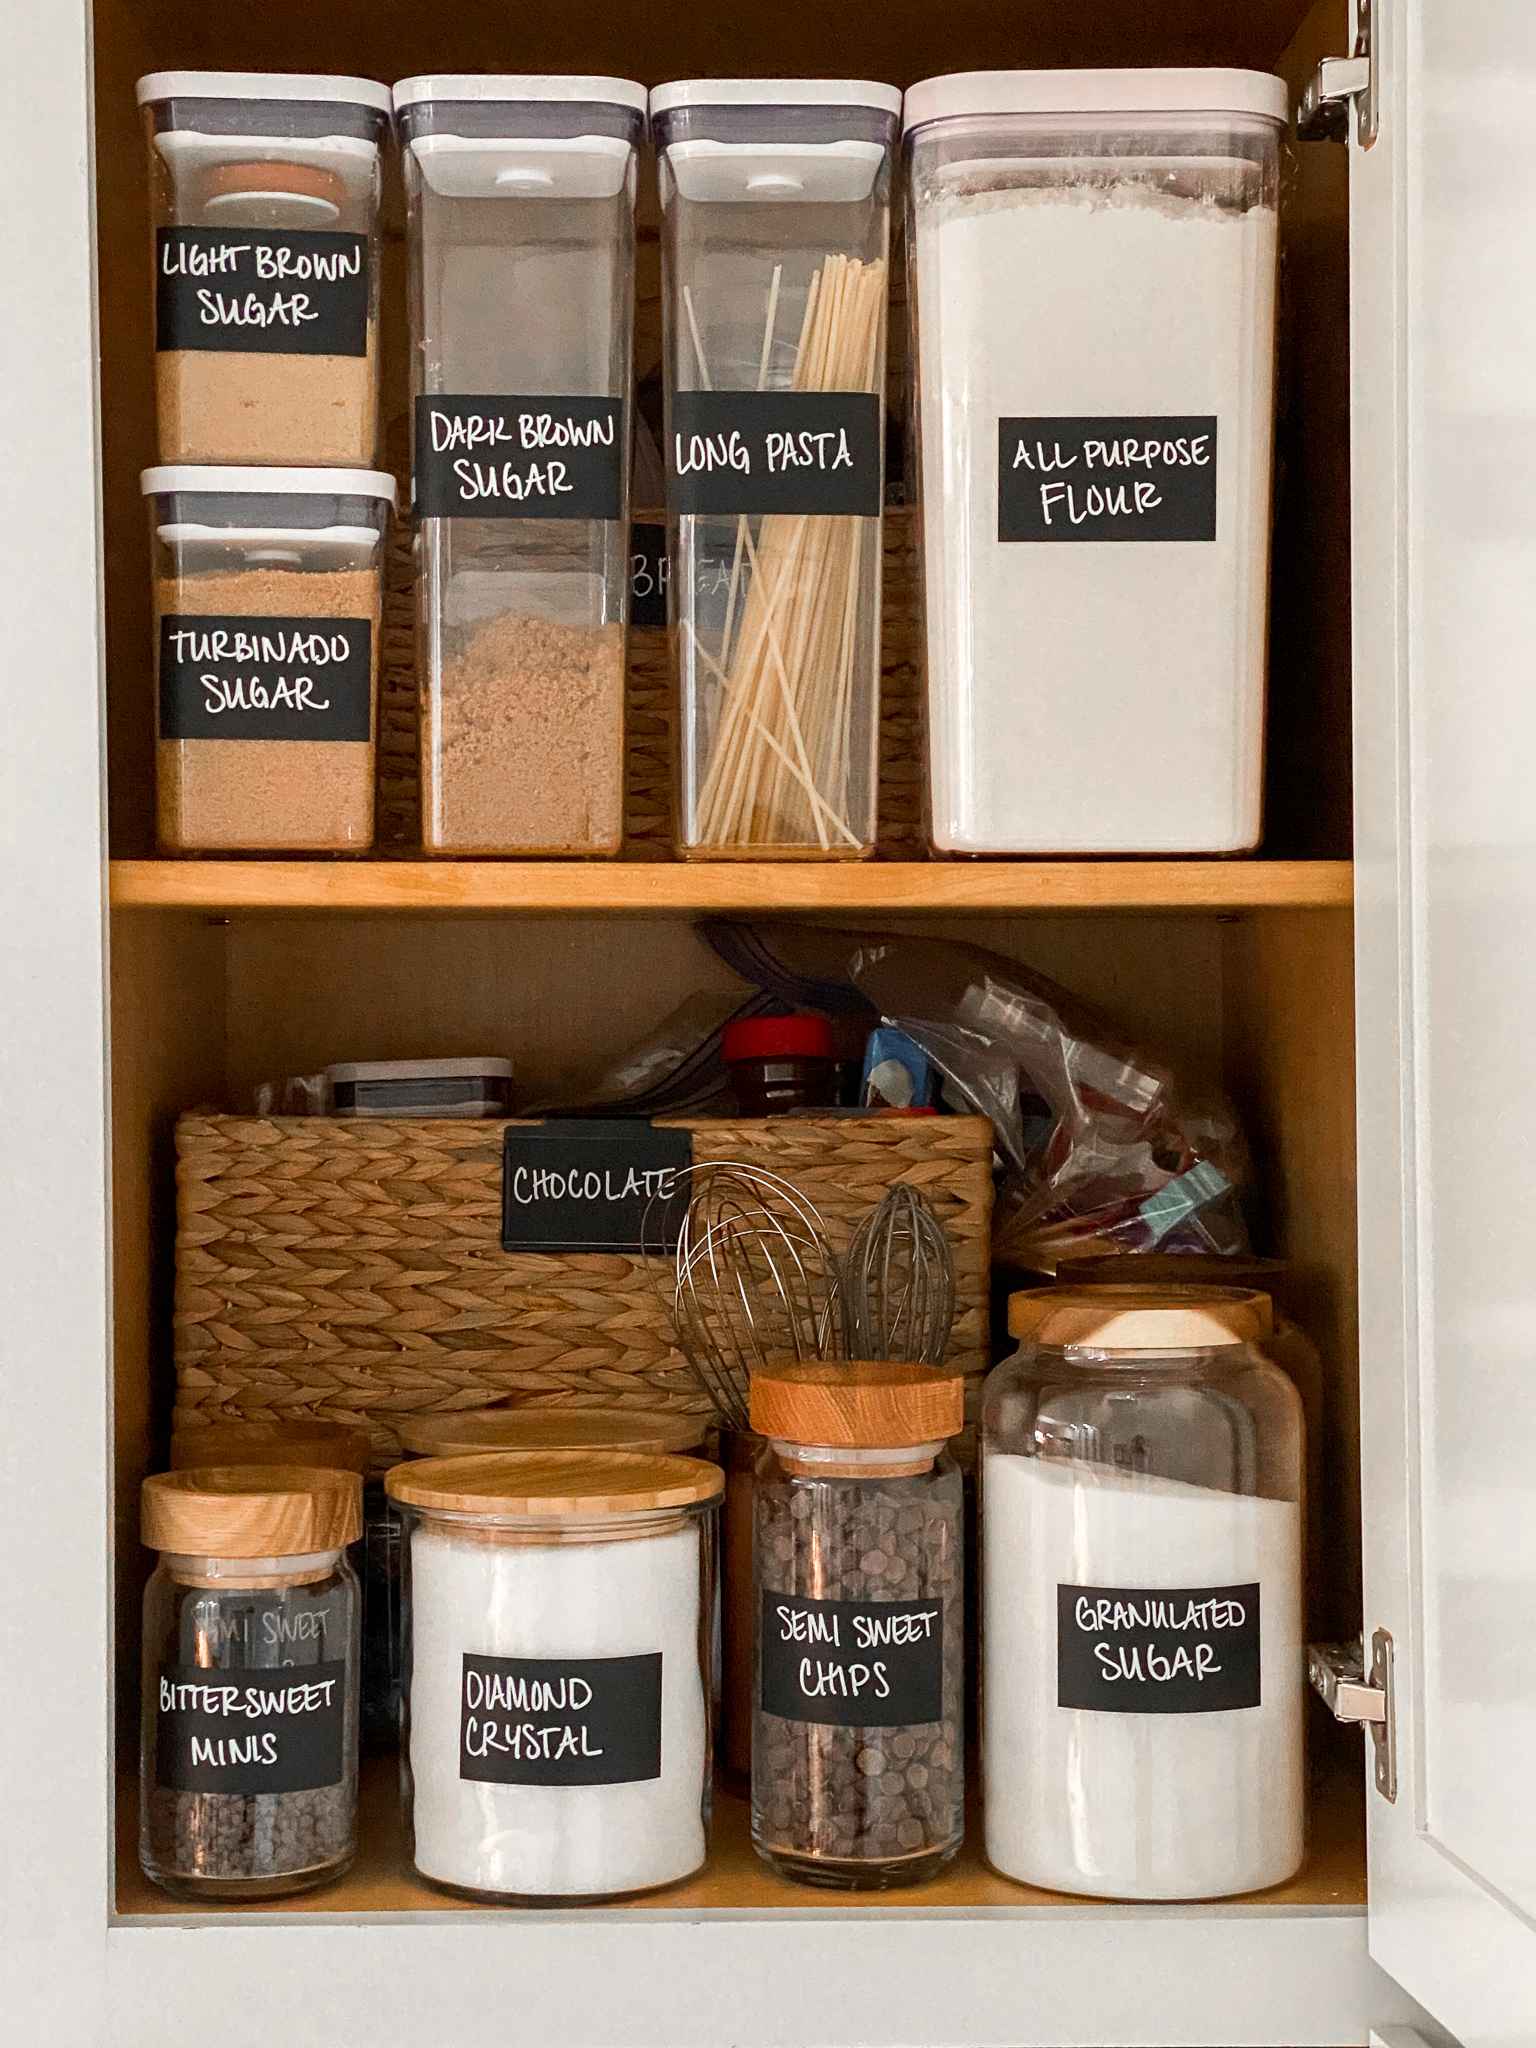 https://natalieparamore.com/wp-content/uploads/How-To-Organize-A-Pantry-With-Deep-Cabinets-_-Natalie-Paramore-5.jpg